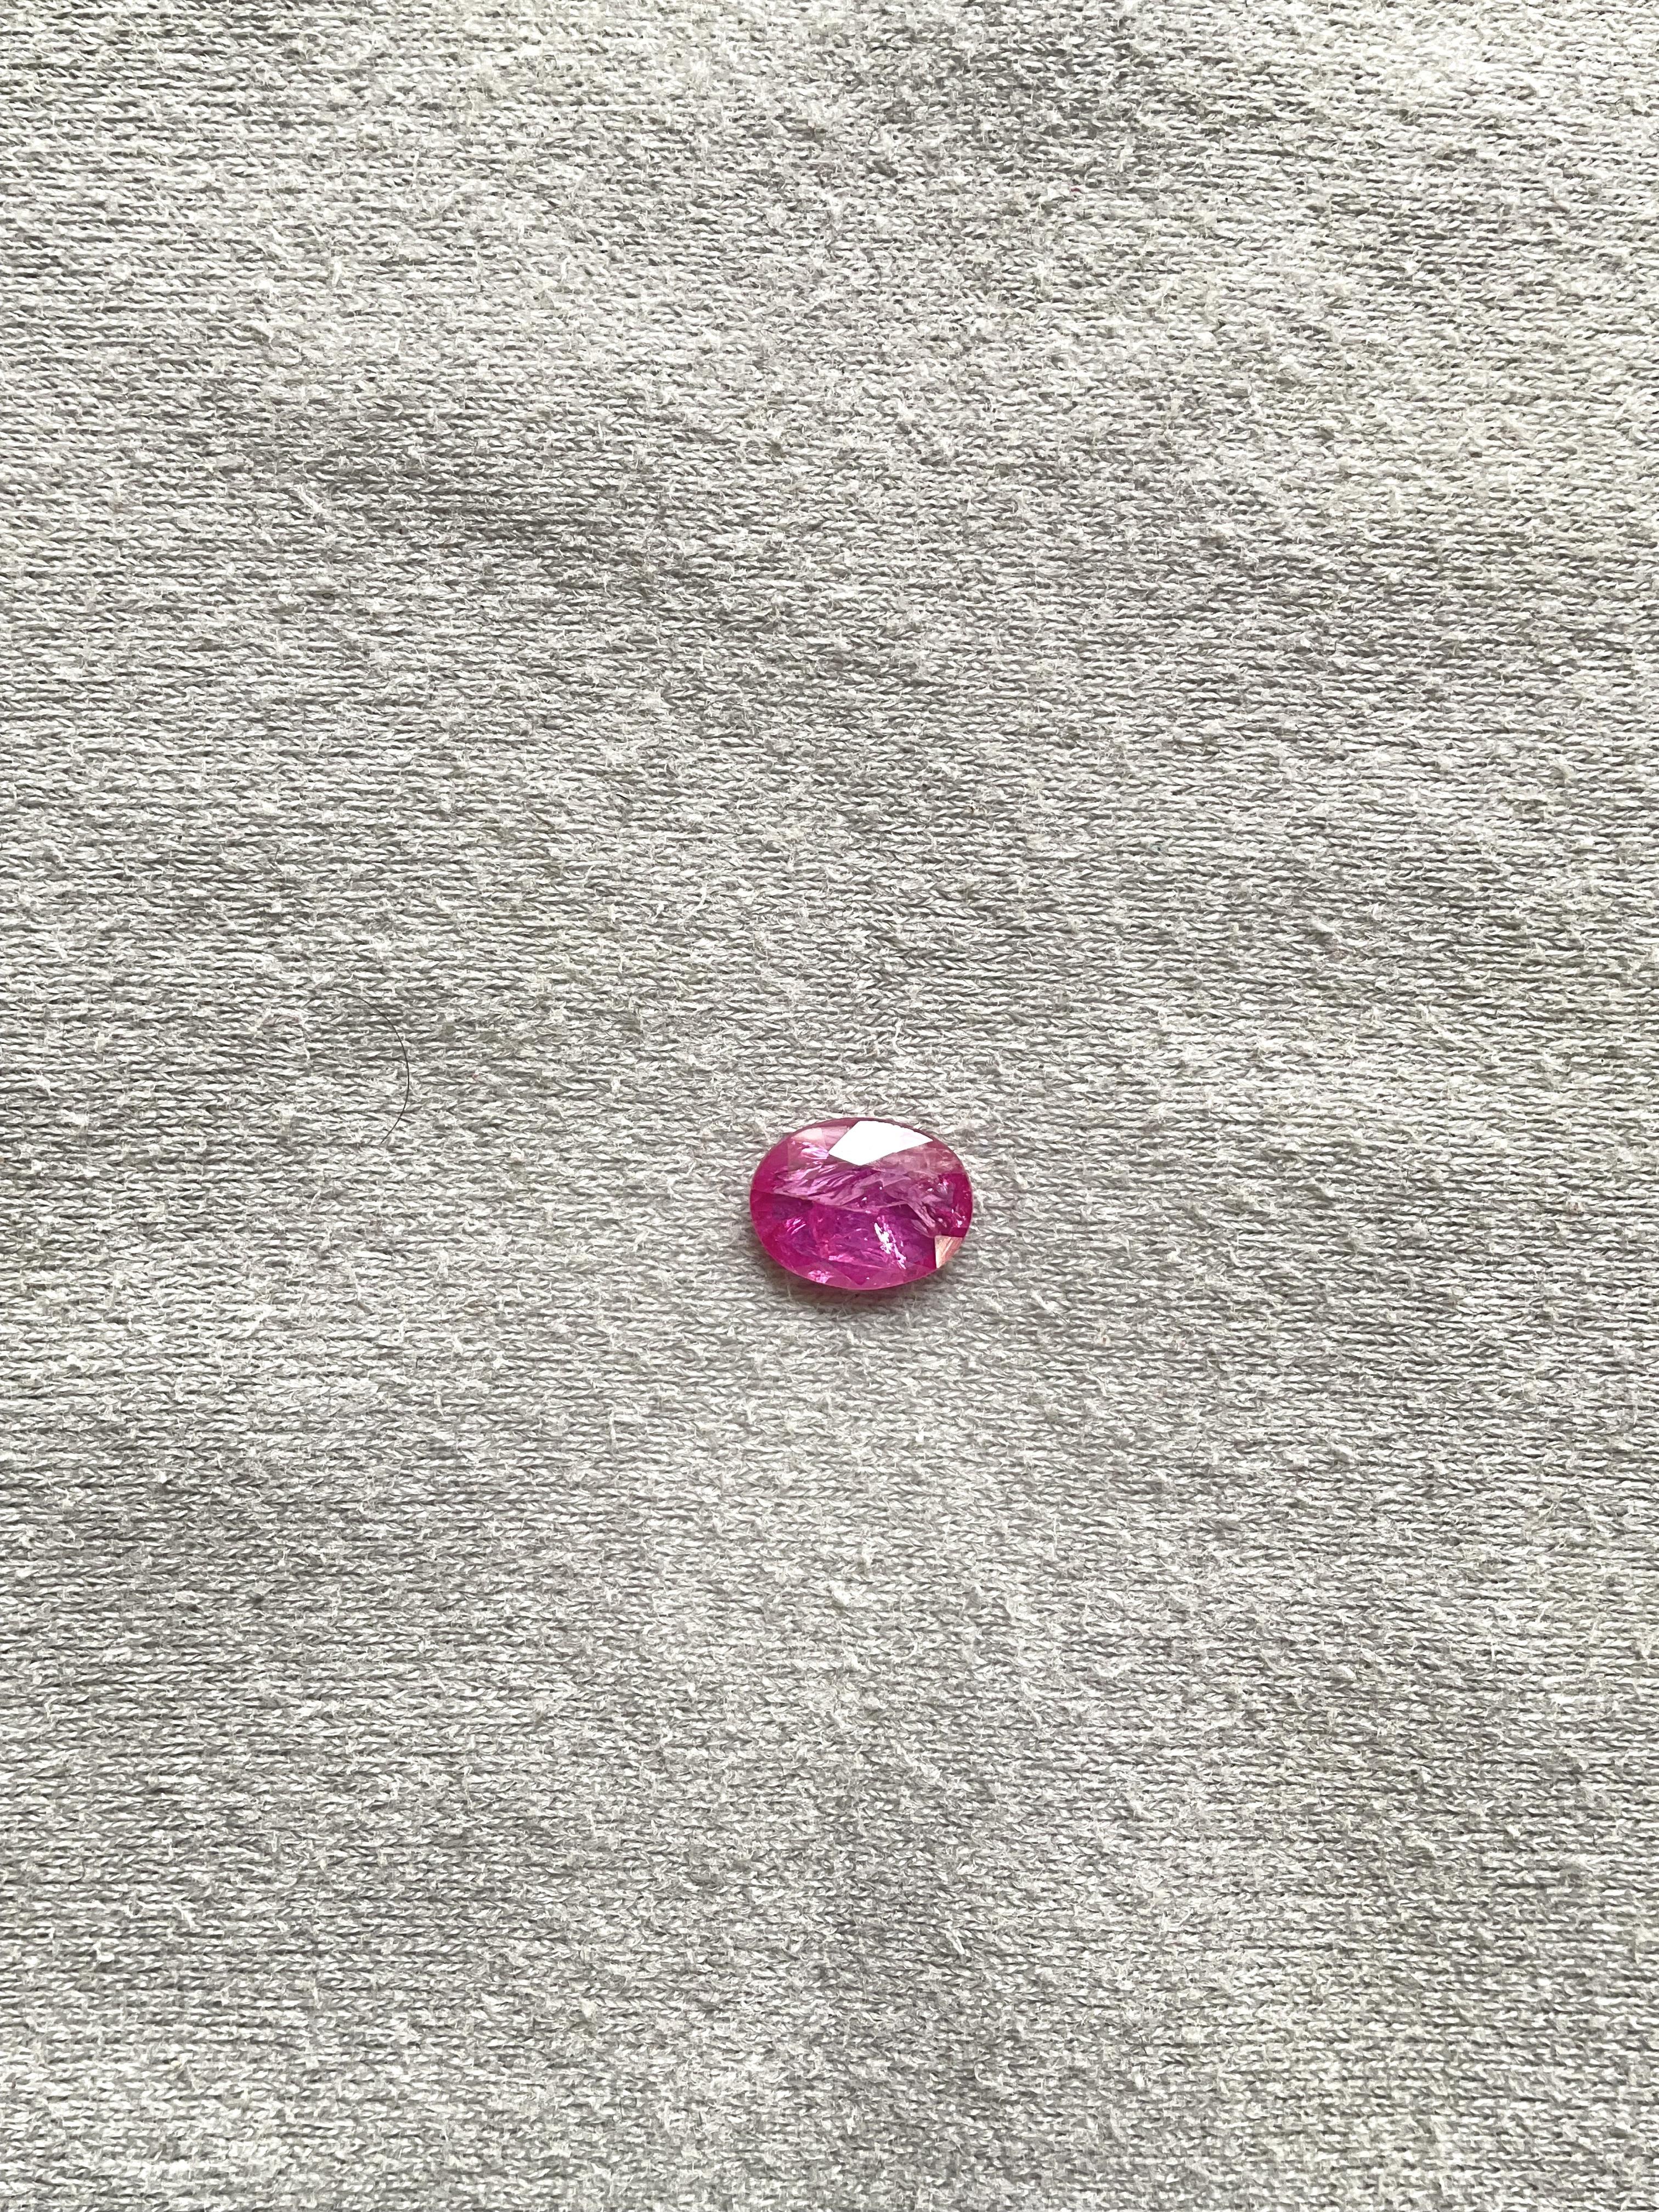 Oval Cut Certified 2.41 Carats Mozambique Ruby Oval Faceted Cutstone No Heat Natural Gem For Sale